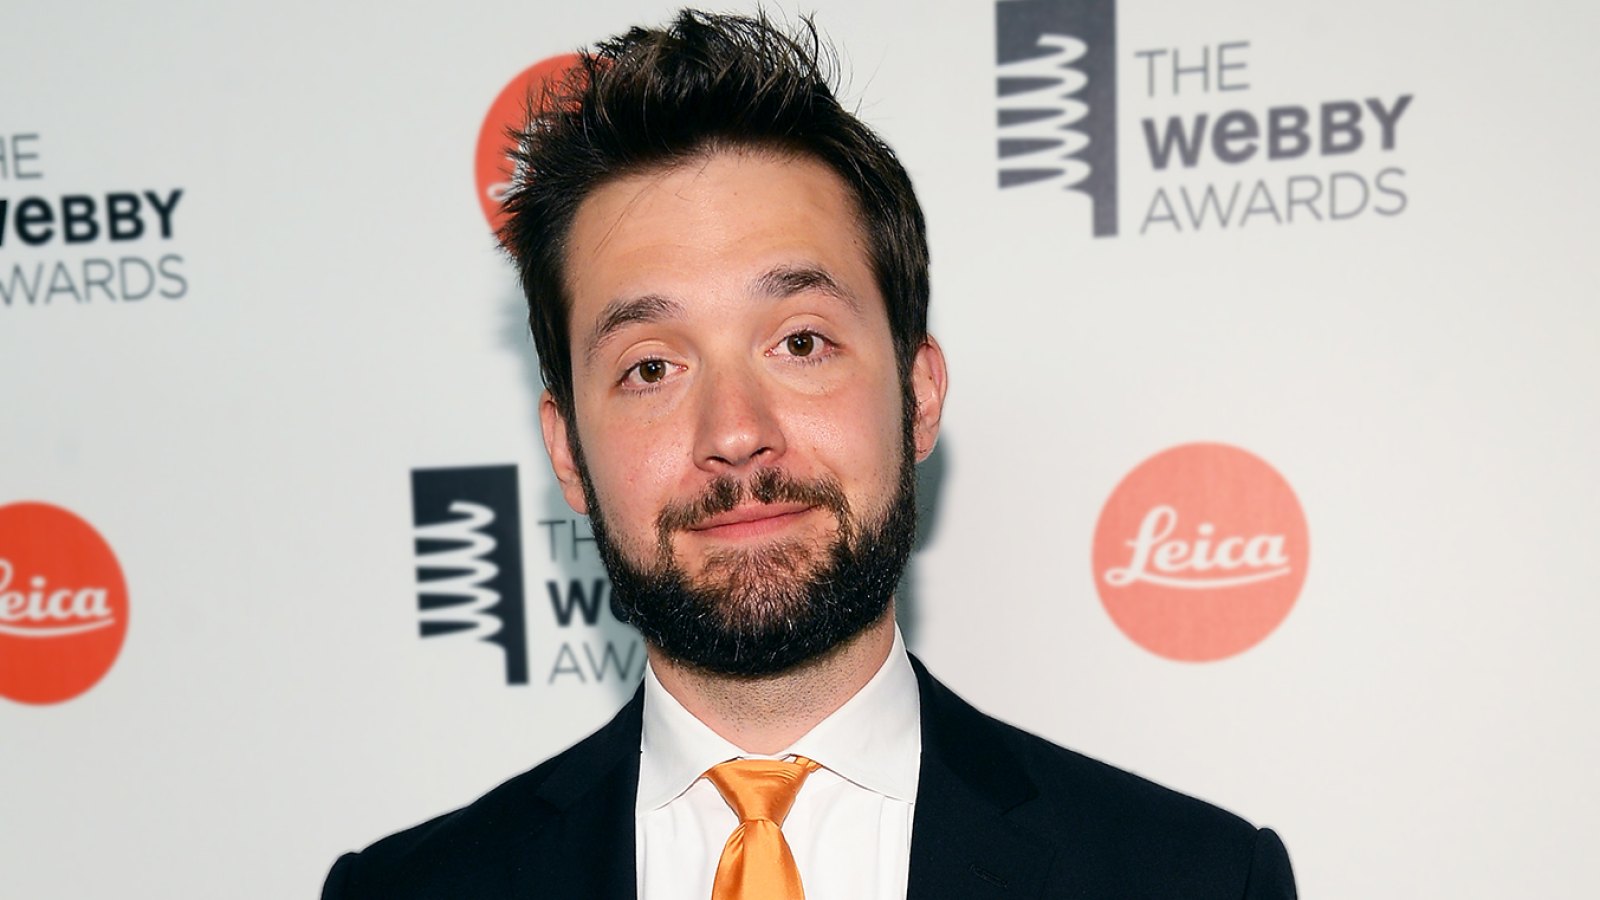 Alexis Ohanian Clarifies His Trip to Italy With Wife Serena Williams